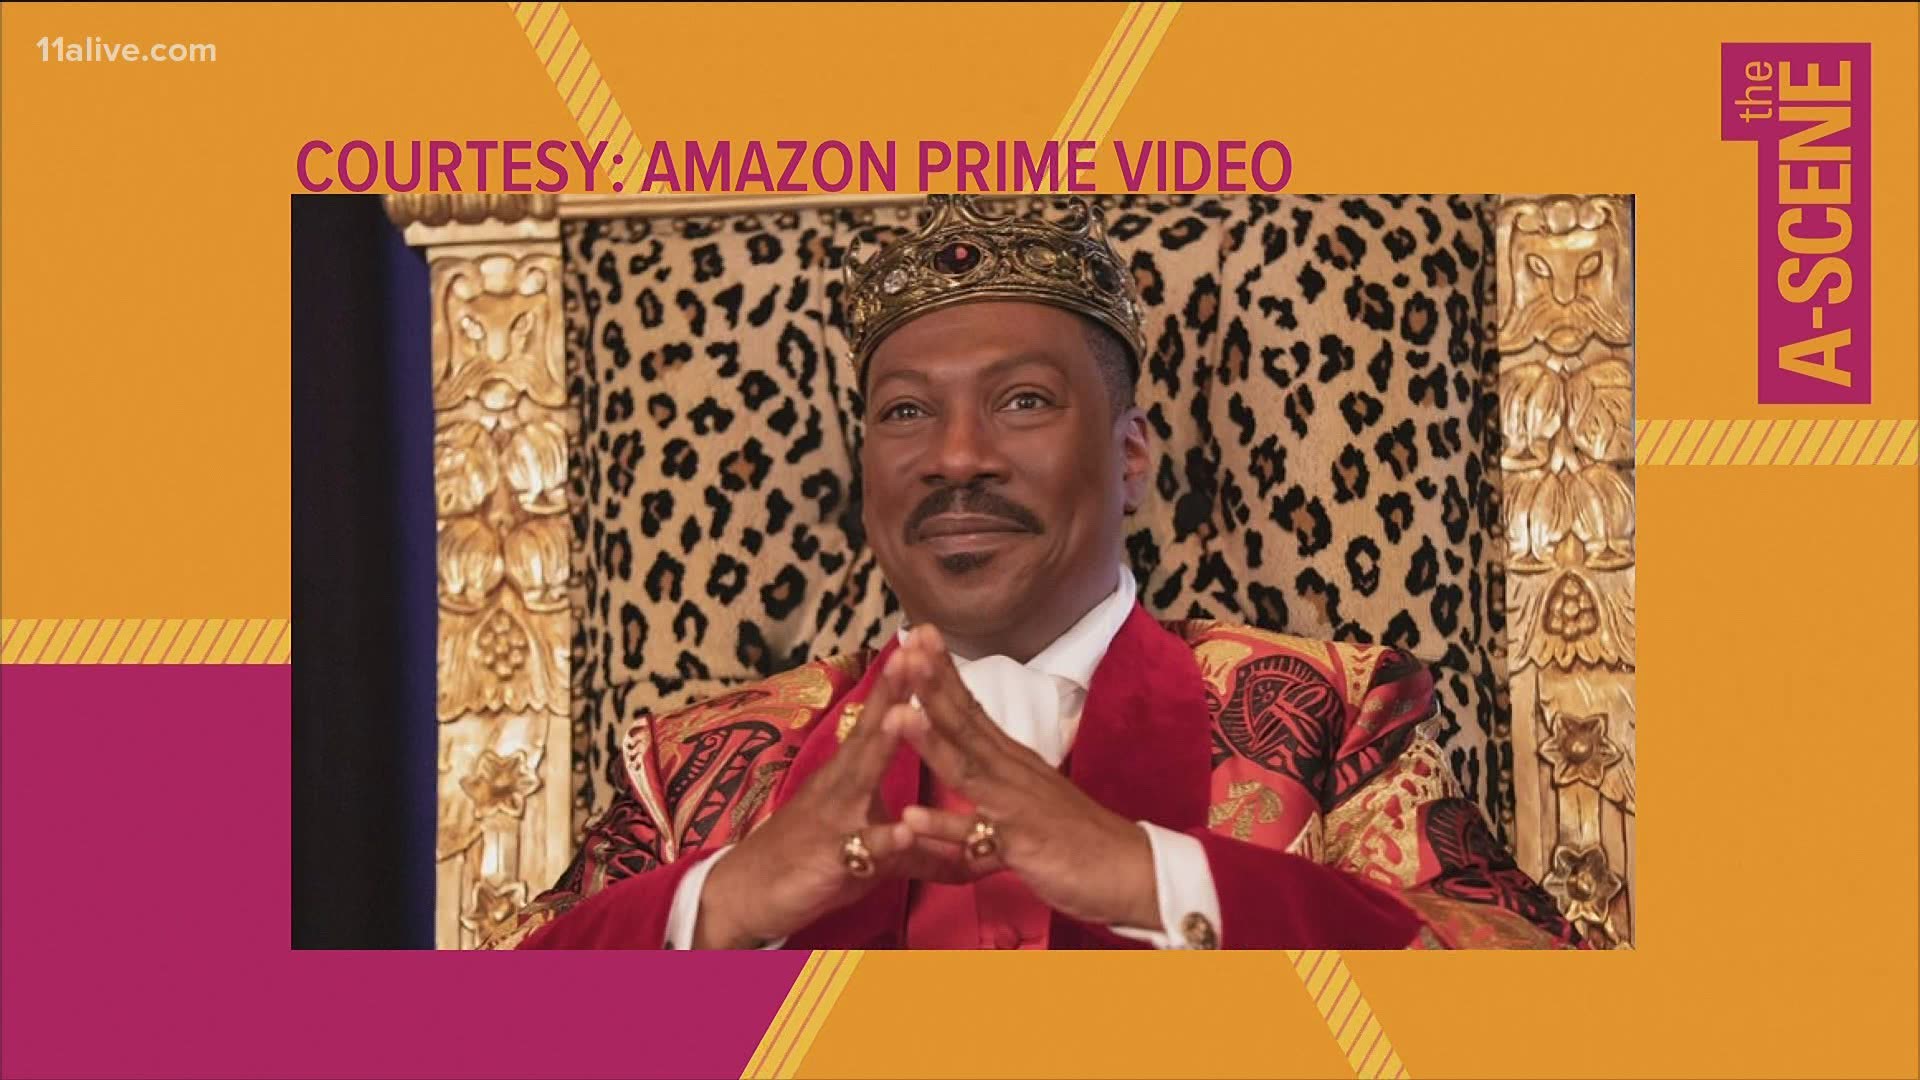 The movie is a sequel to the 80s Eddie Murphy classic "Coming to America."